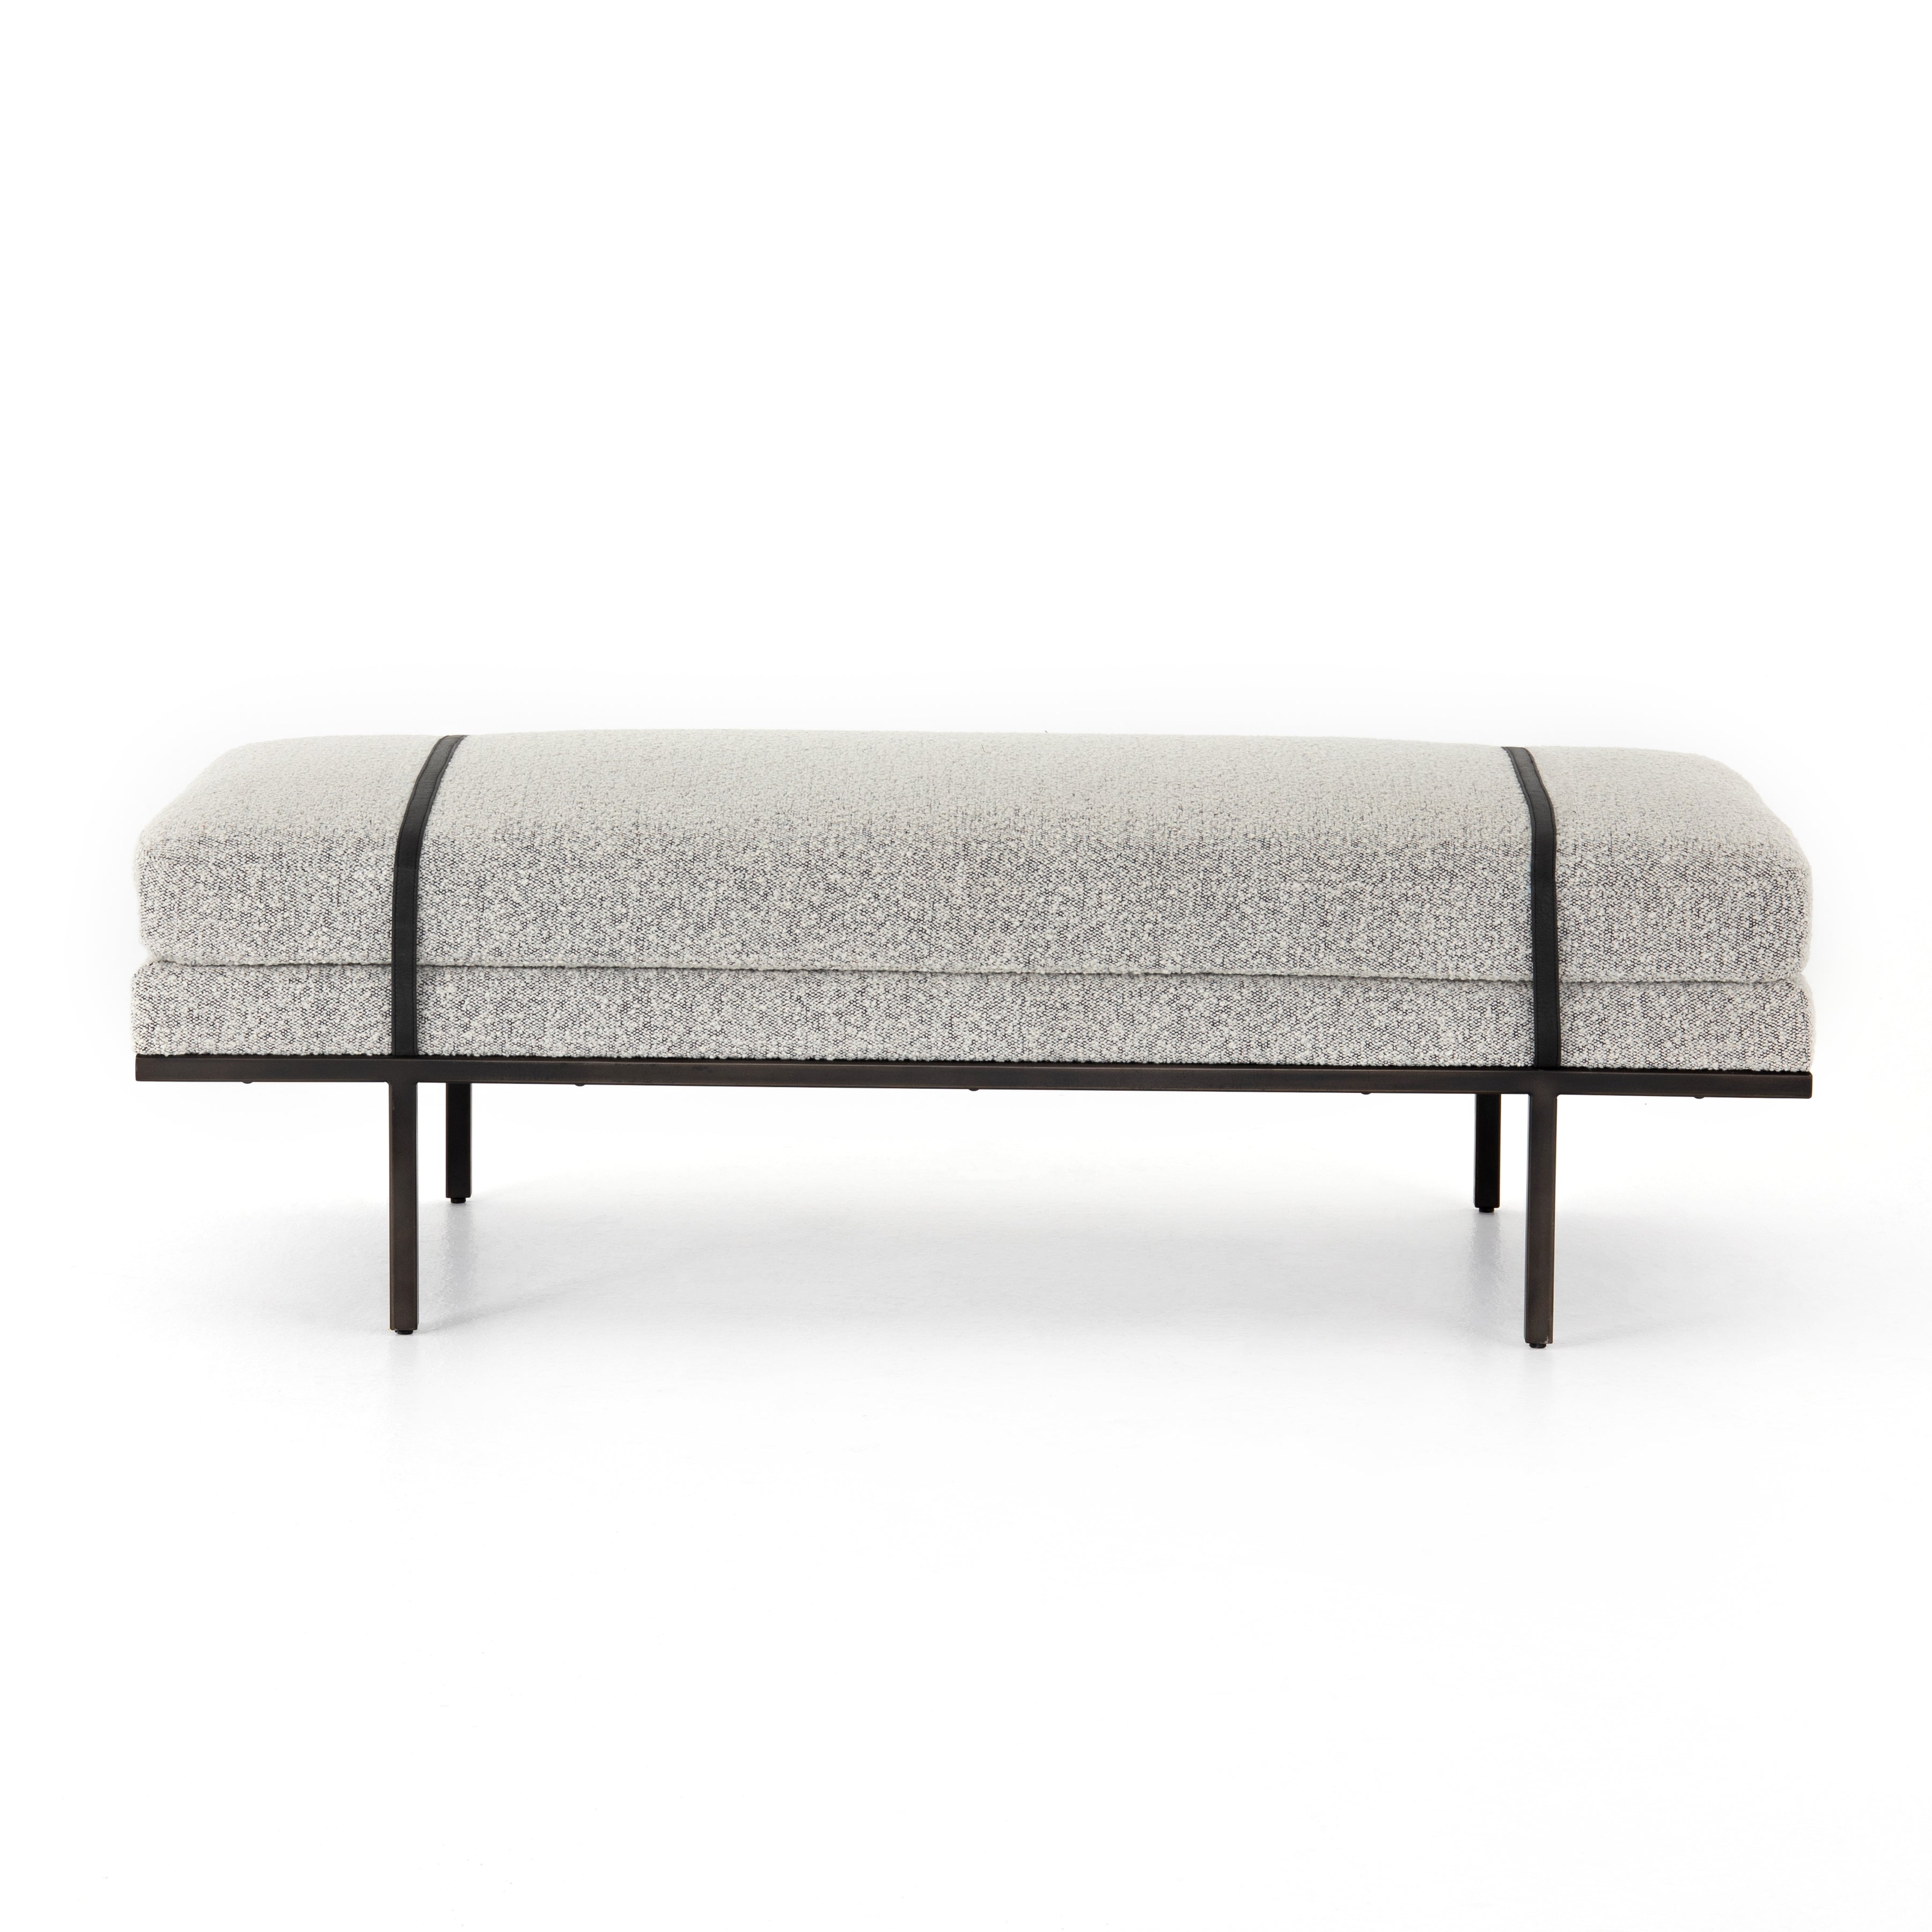 Make a chic statement with the Harris Knoll Domino Accent Bench. Decorative straps of black top-grain leather take chaise-style bench seating to the next level. Airy, elongated legs lend a look of lightness for balance.  Available late September 2020!  Overall Dimensions: 60"w x 26"d x 19.25"h Materials: Solid Parawood